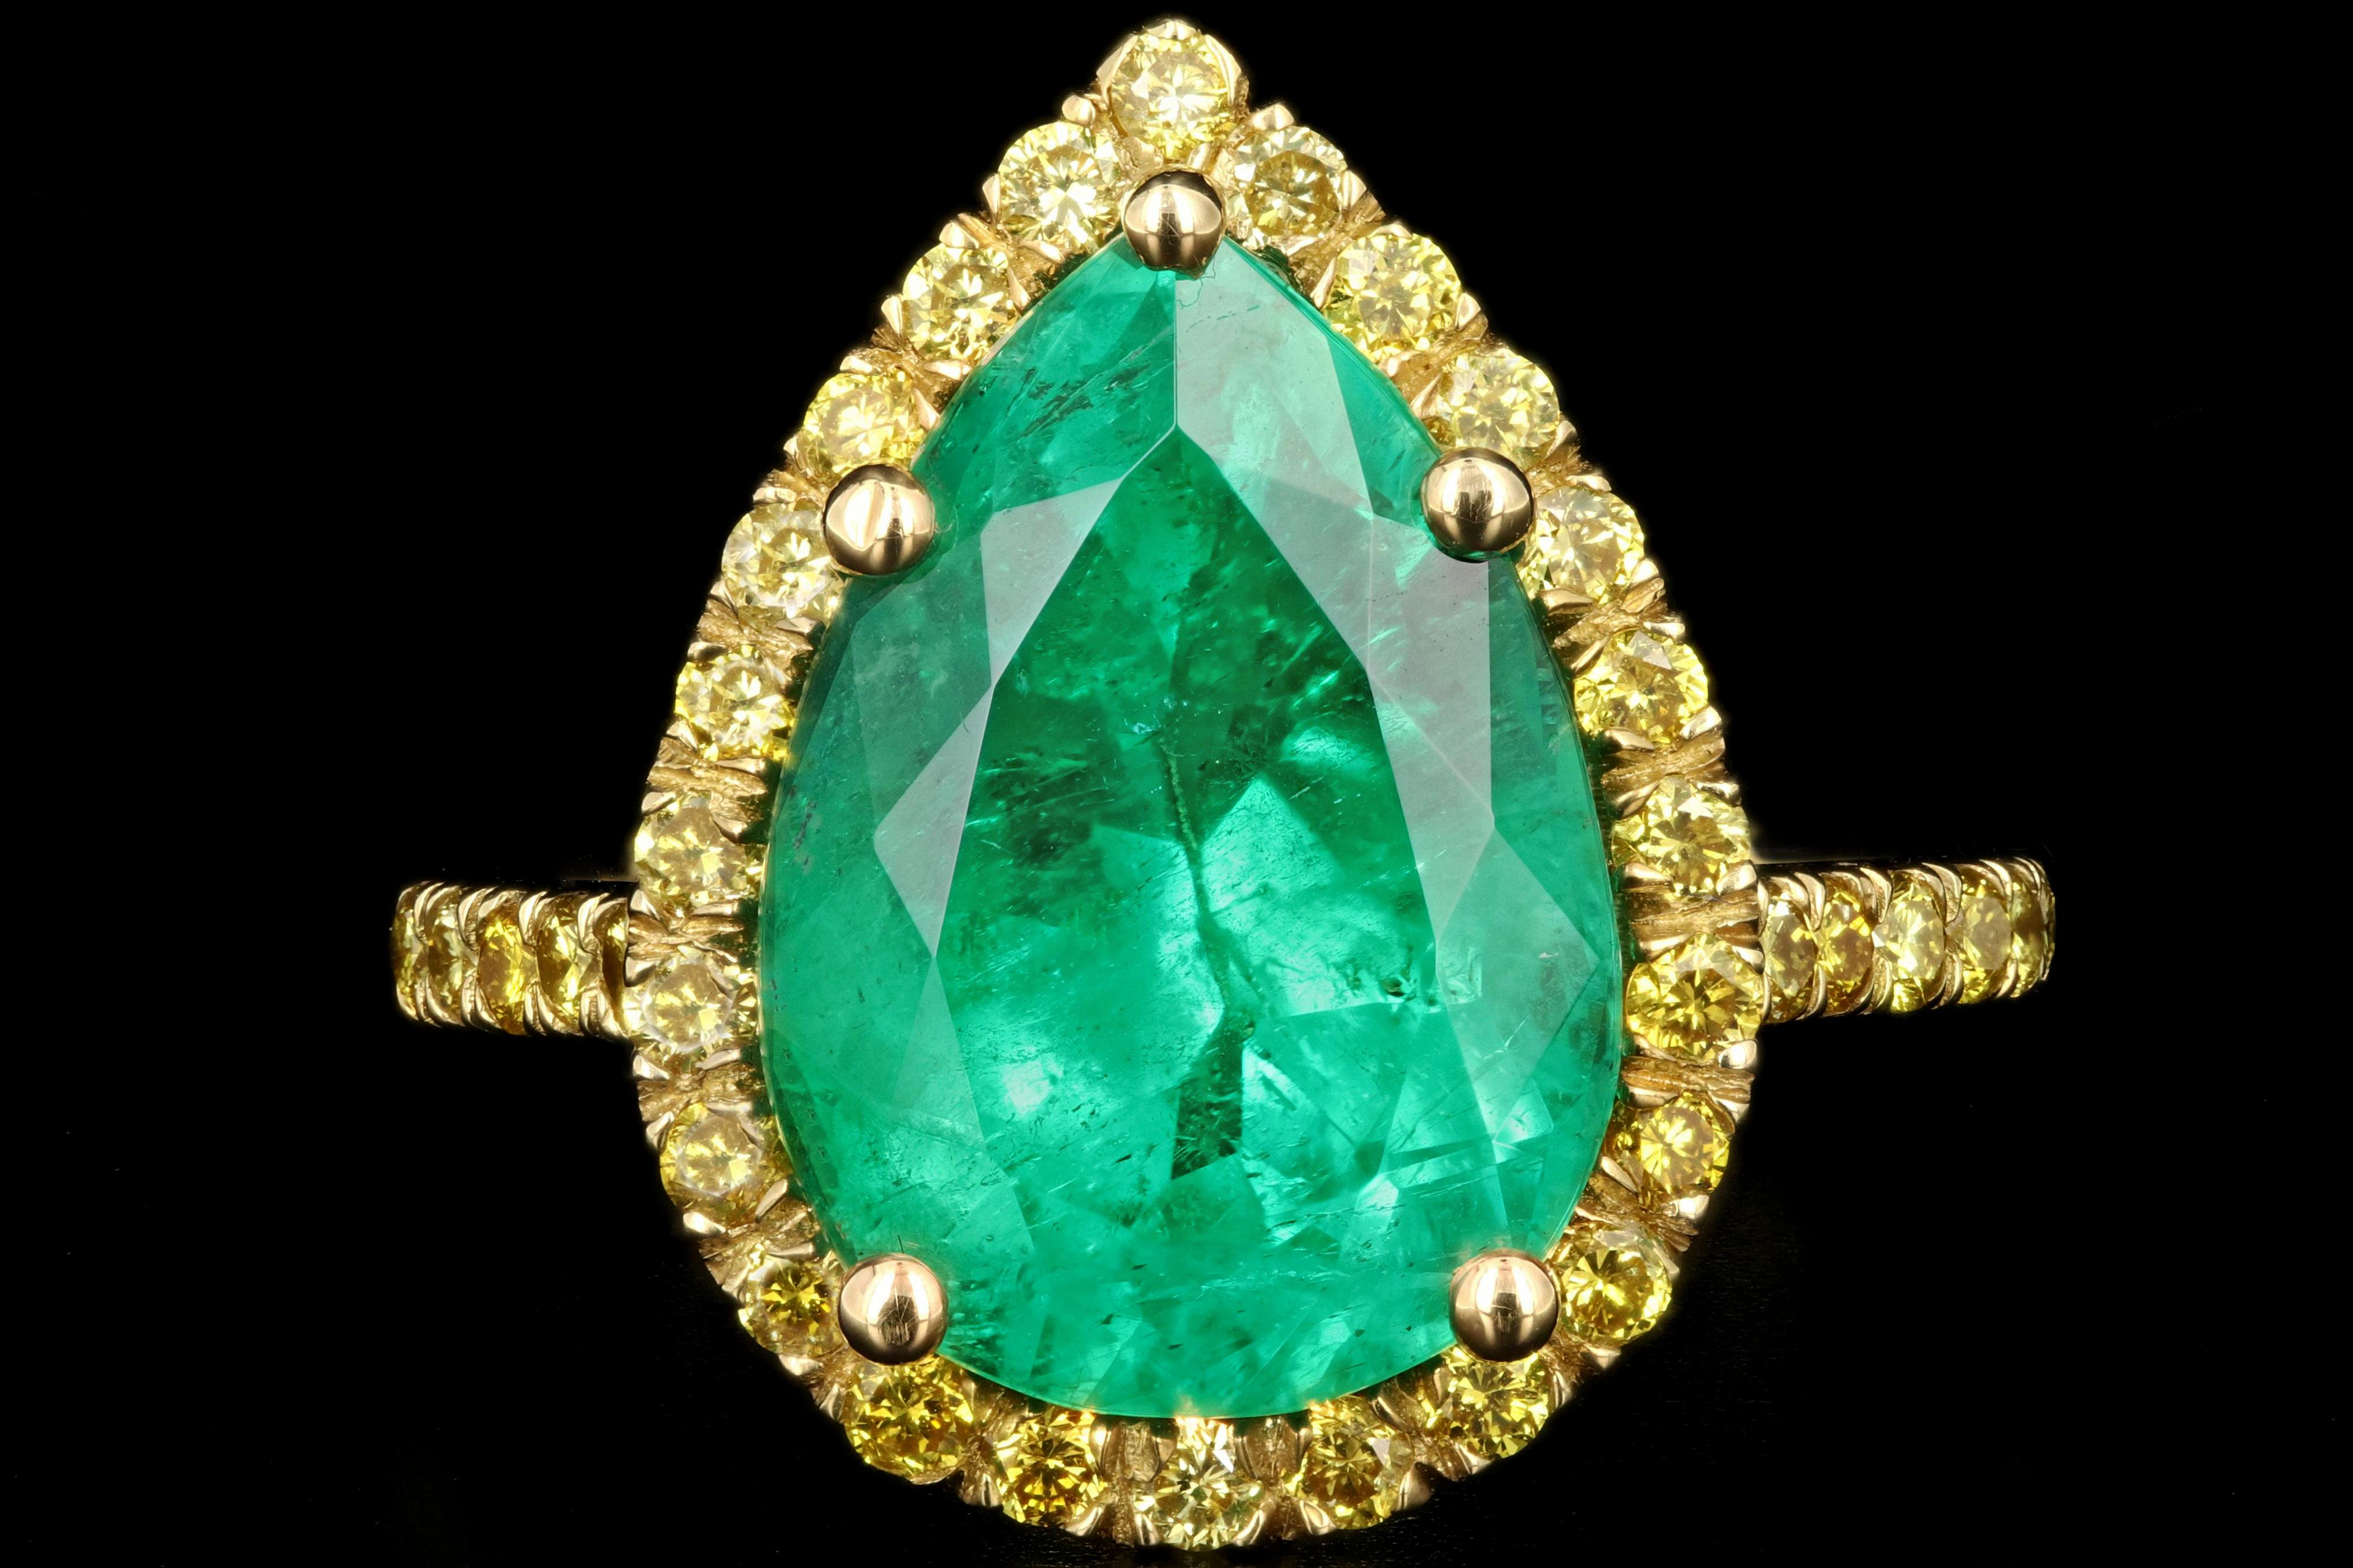 Era: Modern

Composition: 18K Yellow Gold

Primary Stone: Oval Cut Colombian Emerald

Carat Weight: 5.92 Carats

Accent Stone: Round Diamonds

Color: Vivid Yellow

Clarity: Vs1/2

Carat Weight: Approximately .75 Carats

Total Carat Weight: